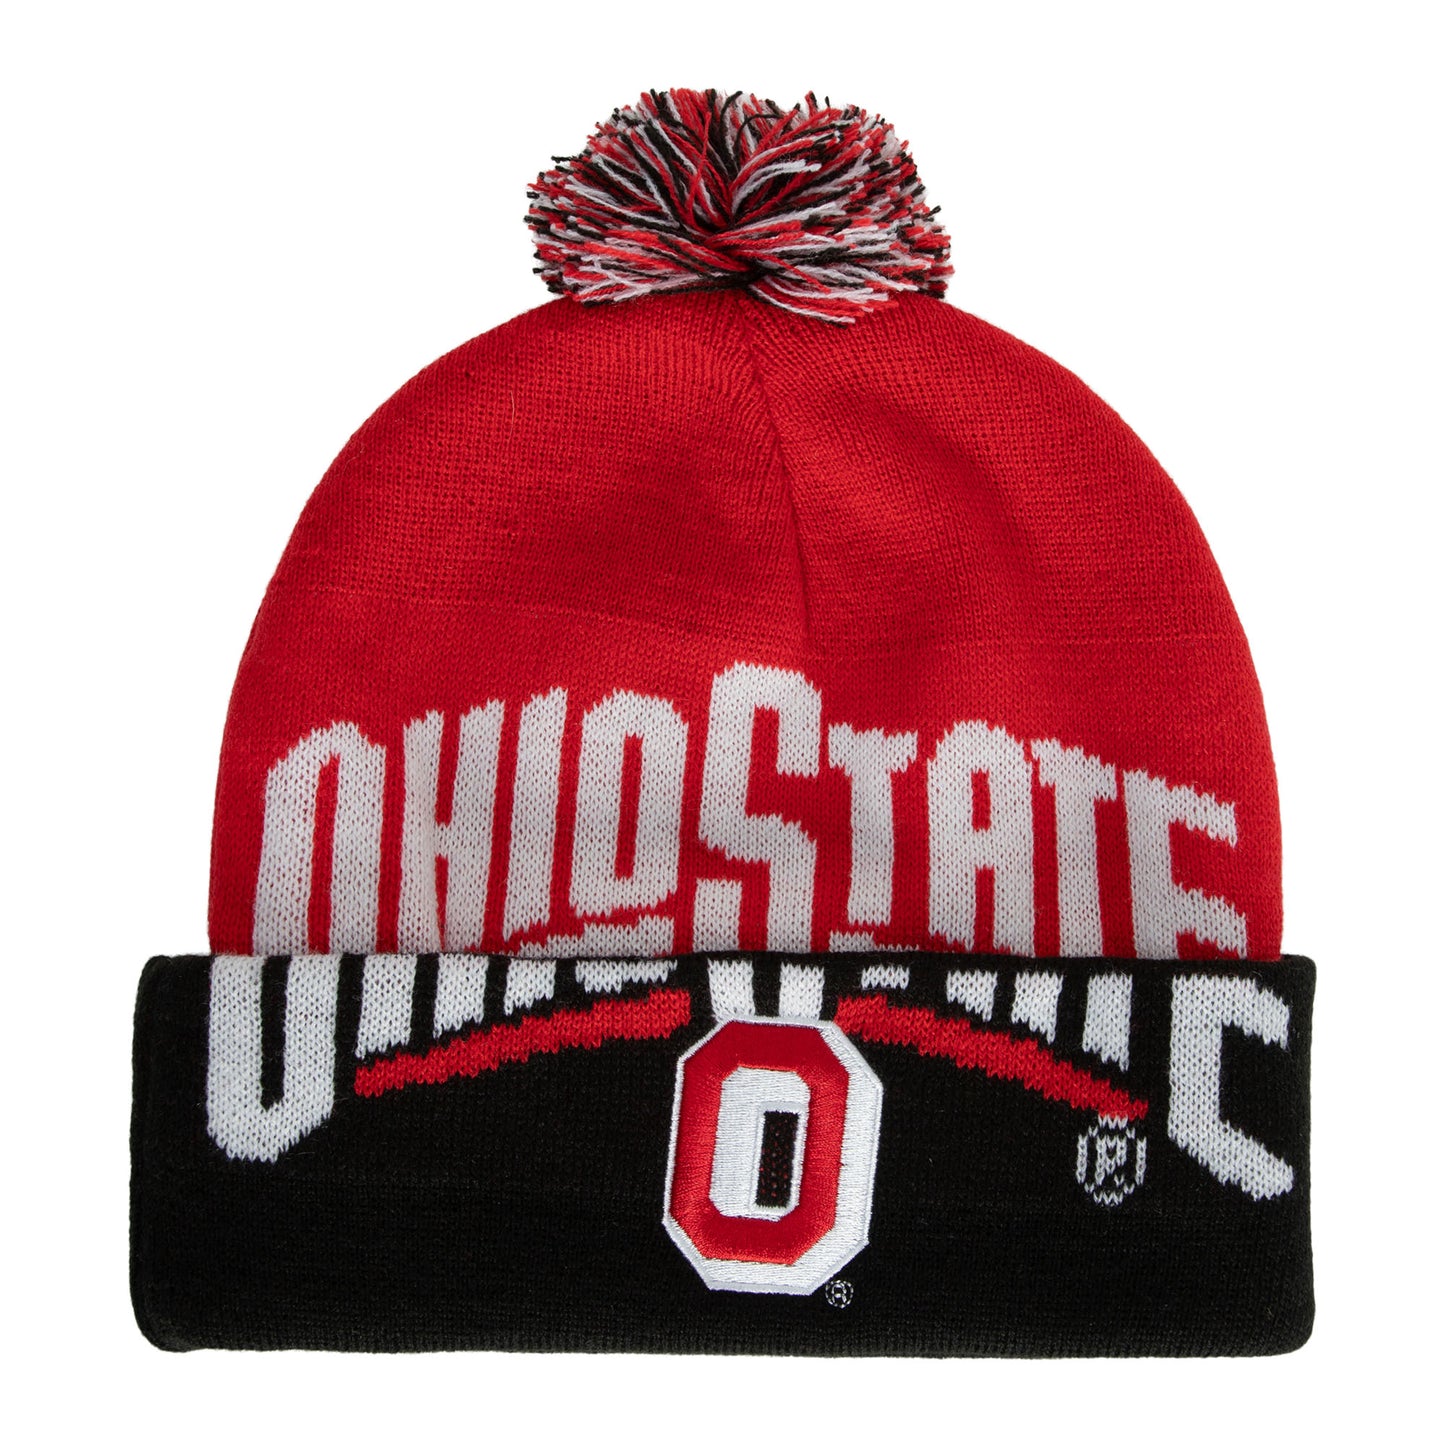 Ohio State Buckeyes NCAA Double Take Pom Knit Hat - Red/Black